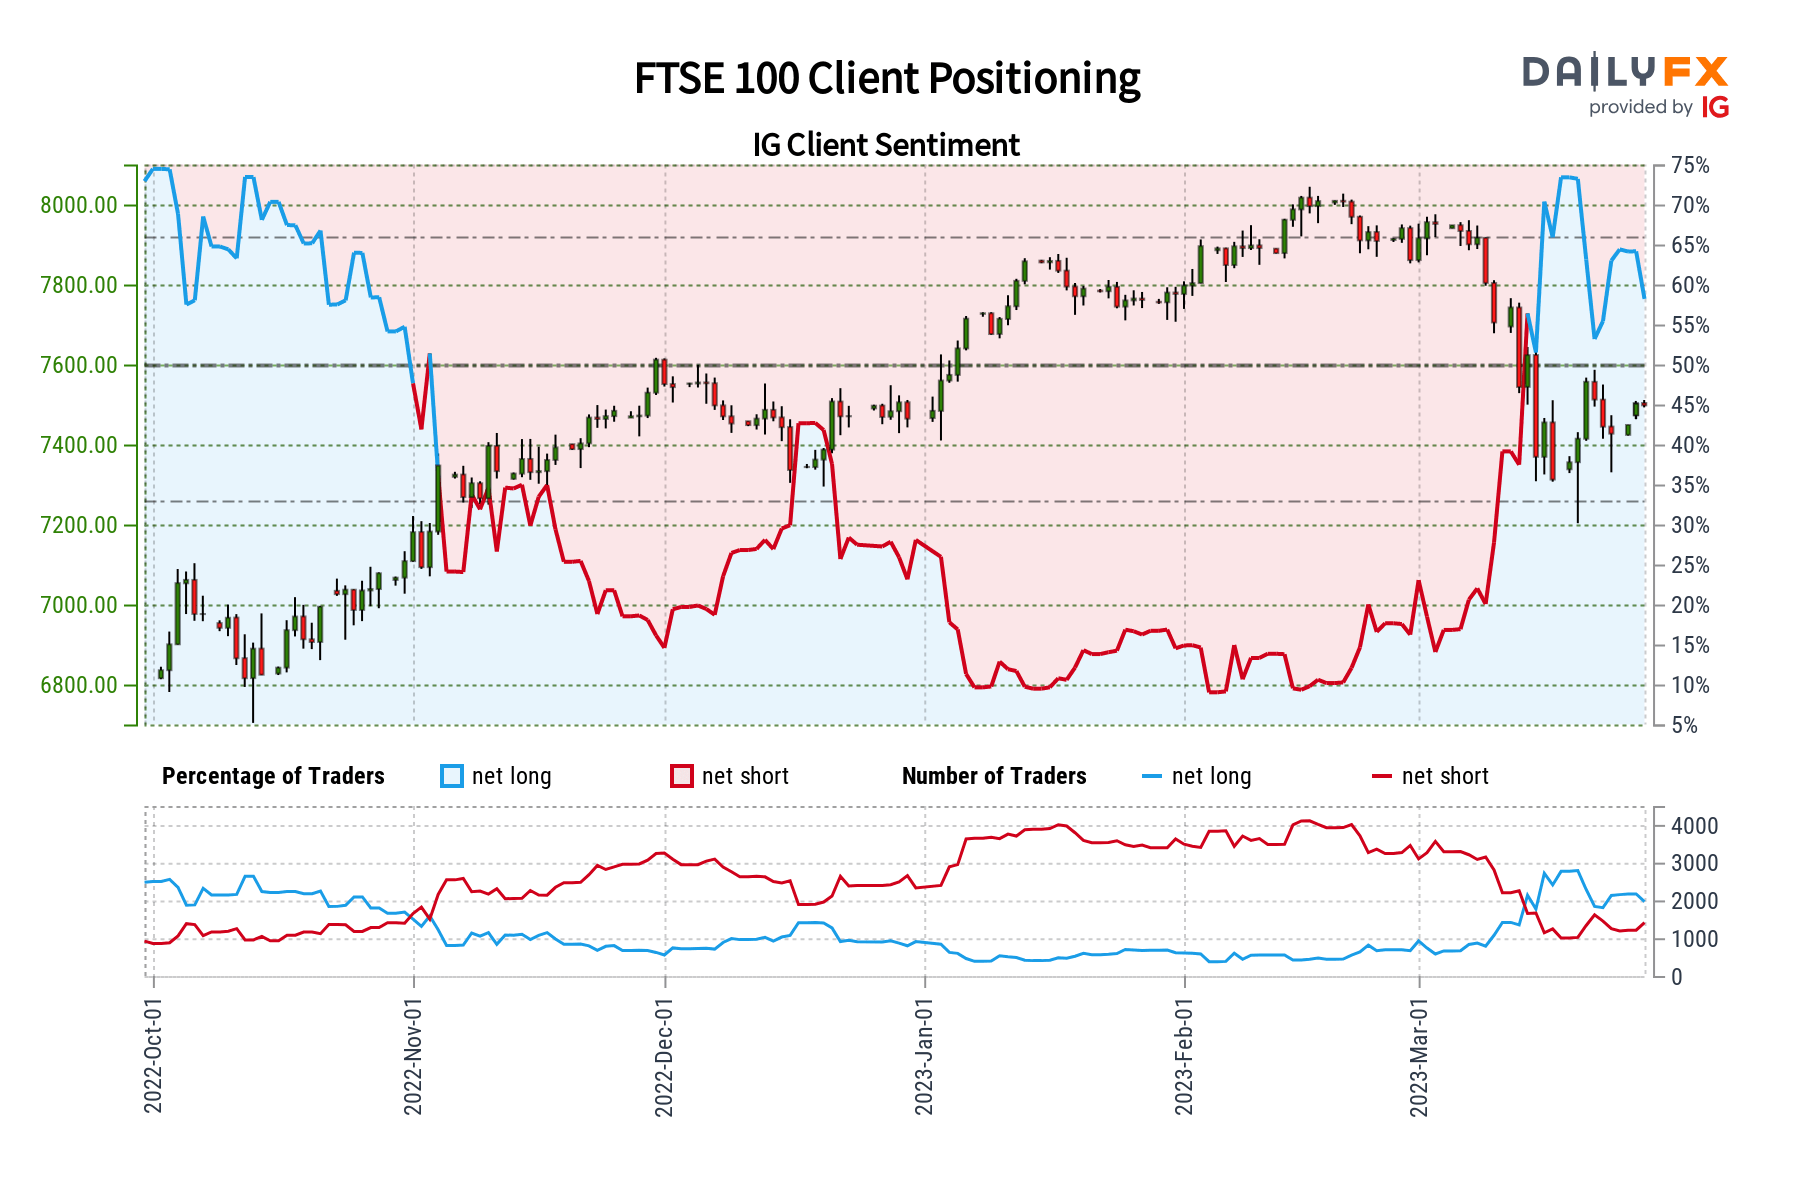 FTSE 100 Sentiment Outlook - صعودی